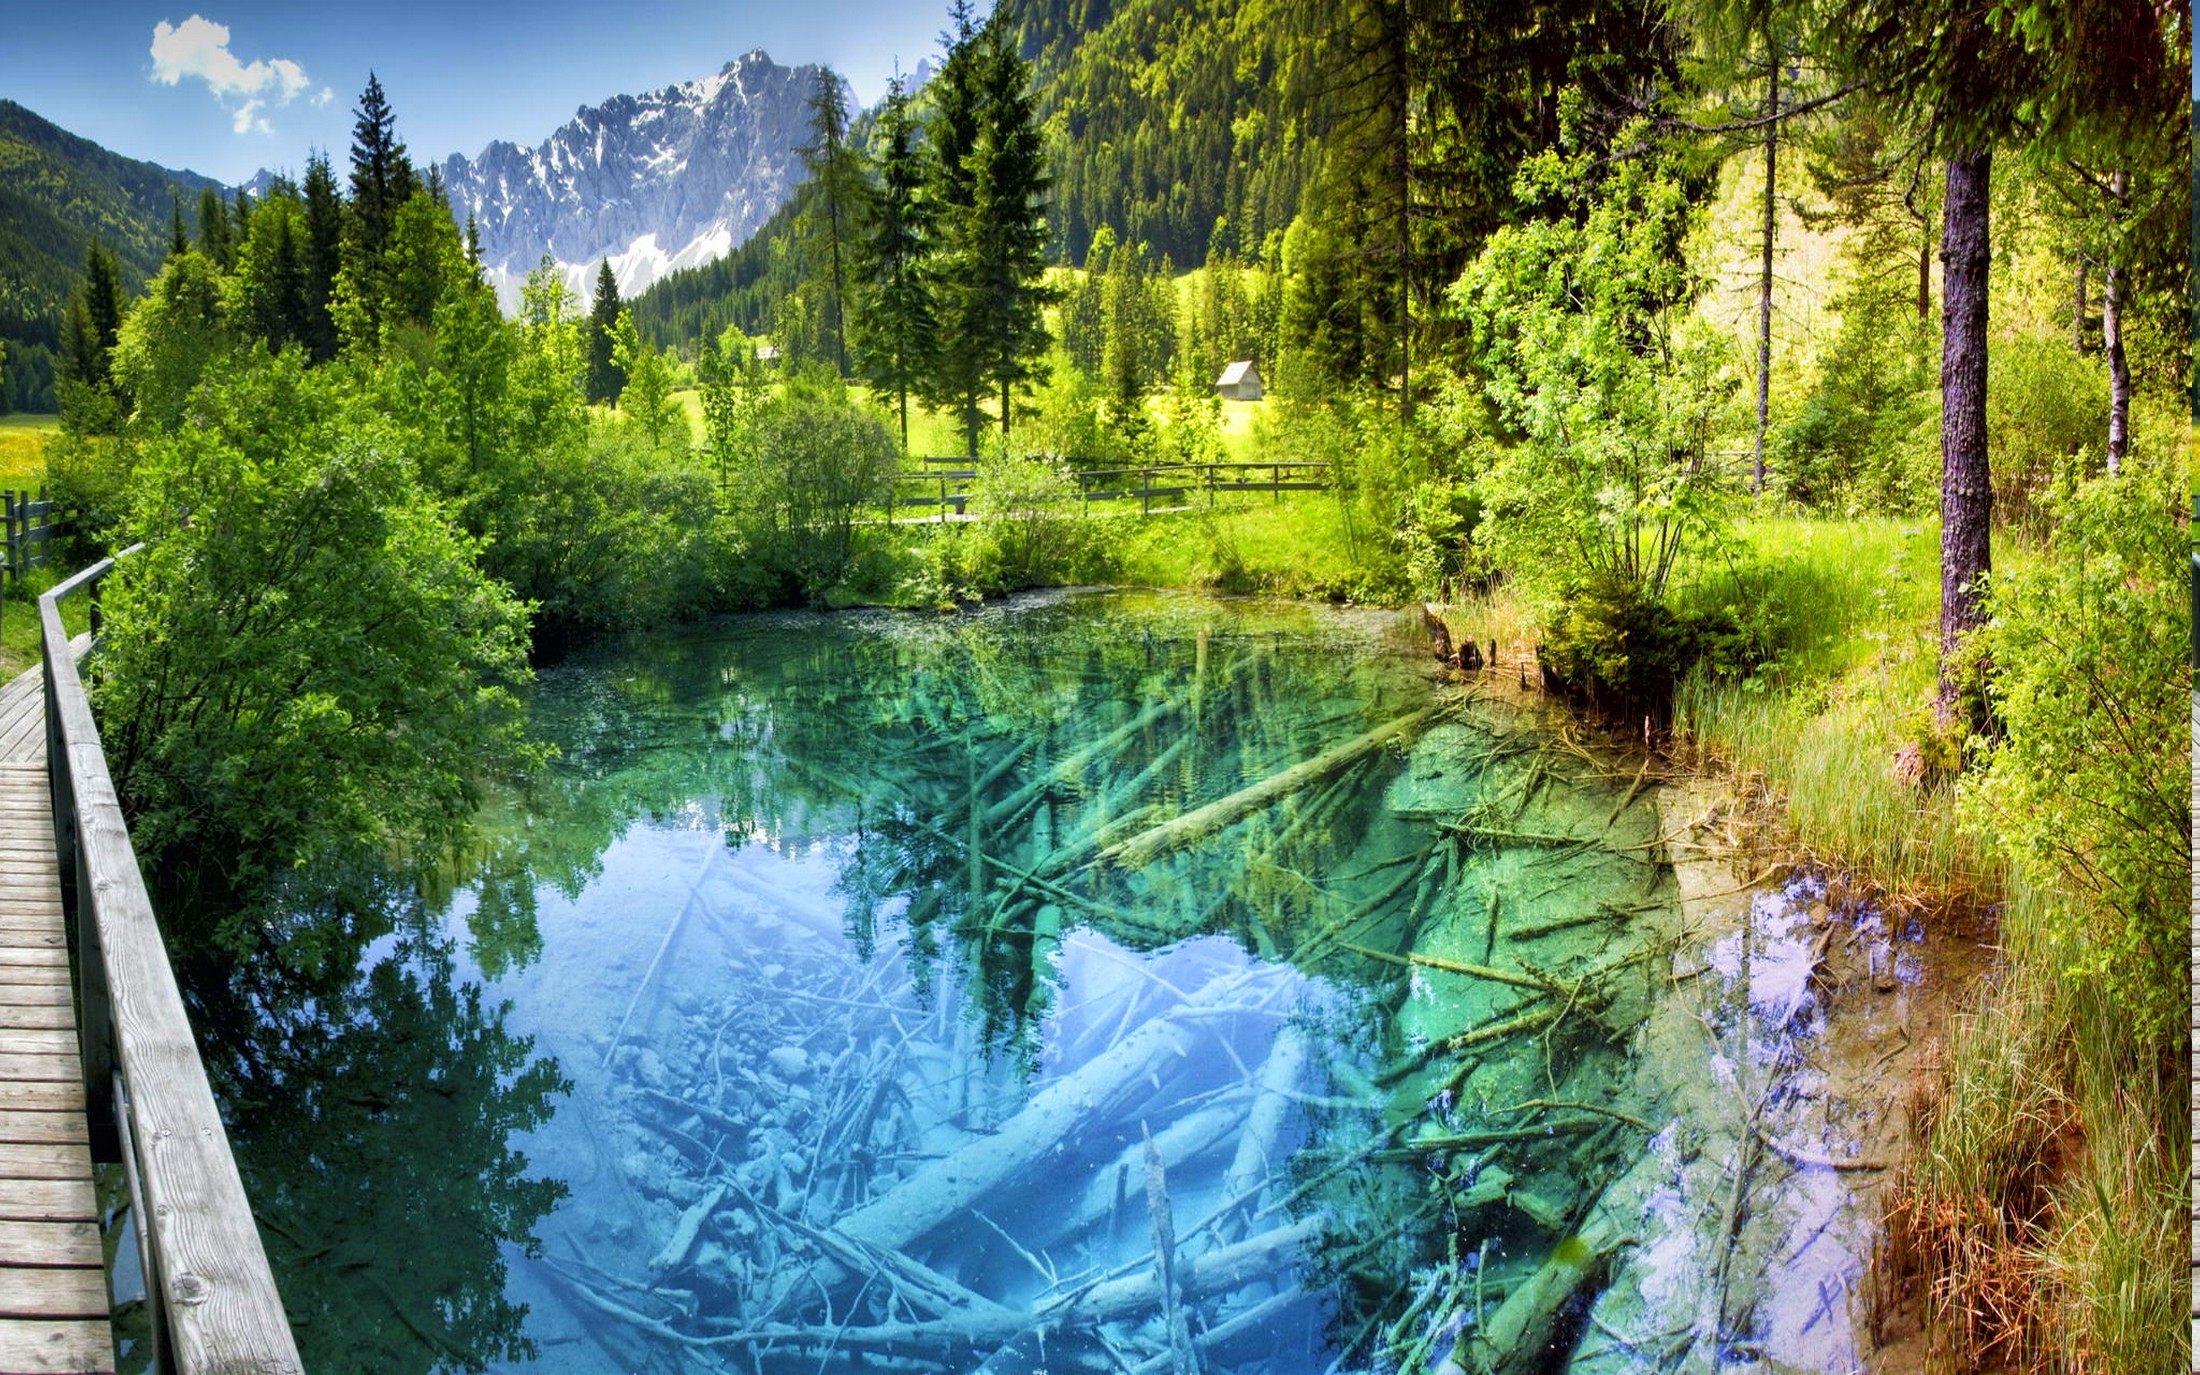 landscape, Nature, Pond, Forest, Walkway, Shrubs, Trees, Water, Turquoise, Mountain, Fence, Summer, Austria, Colorful, Europe, Snowy Peak, Reflection Wallpaper